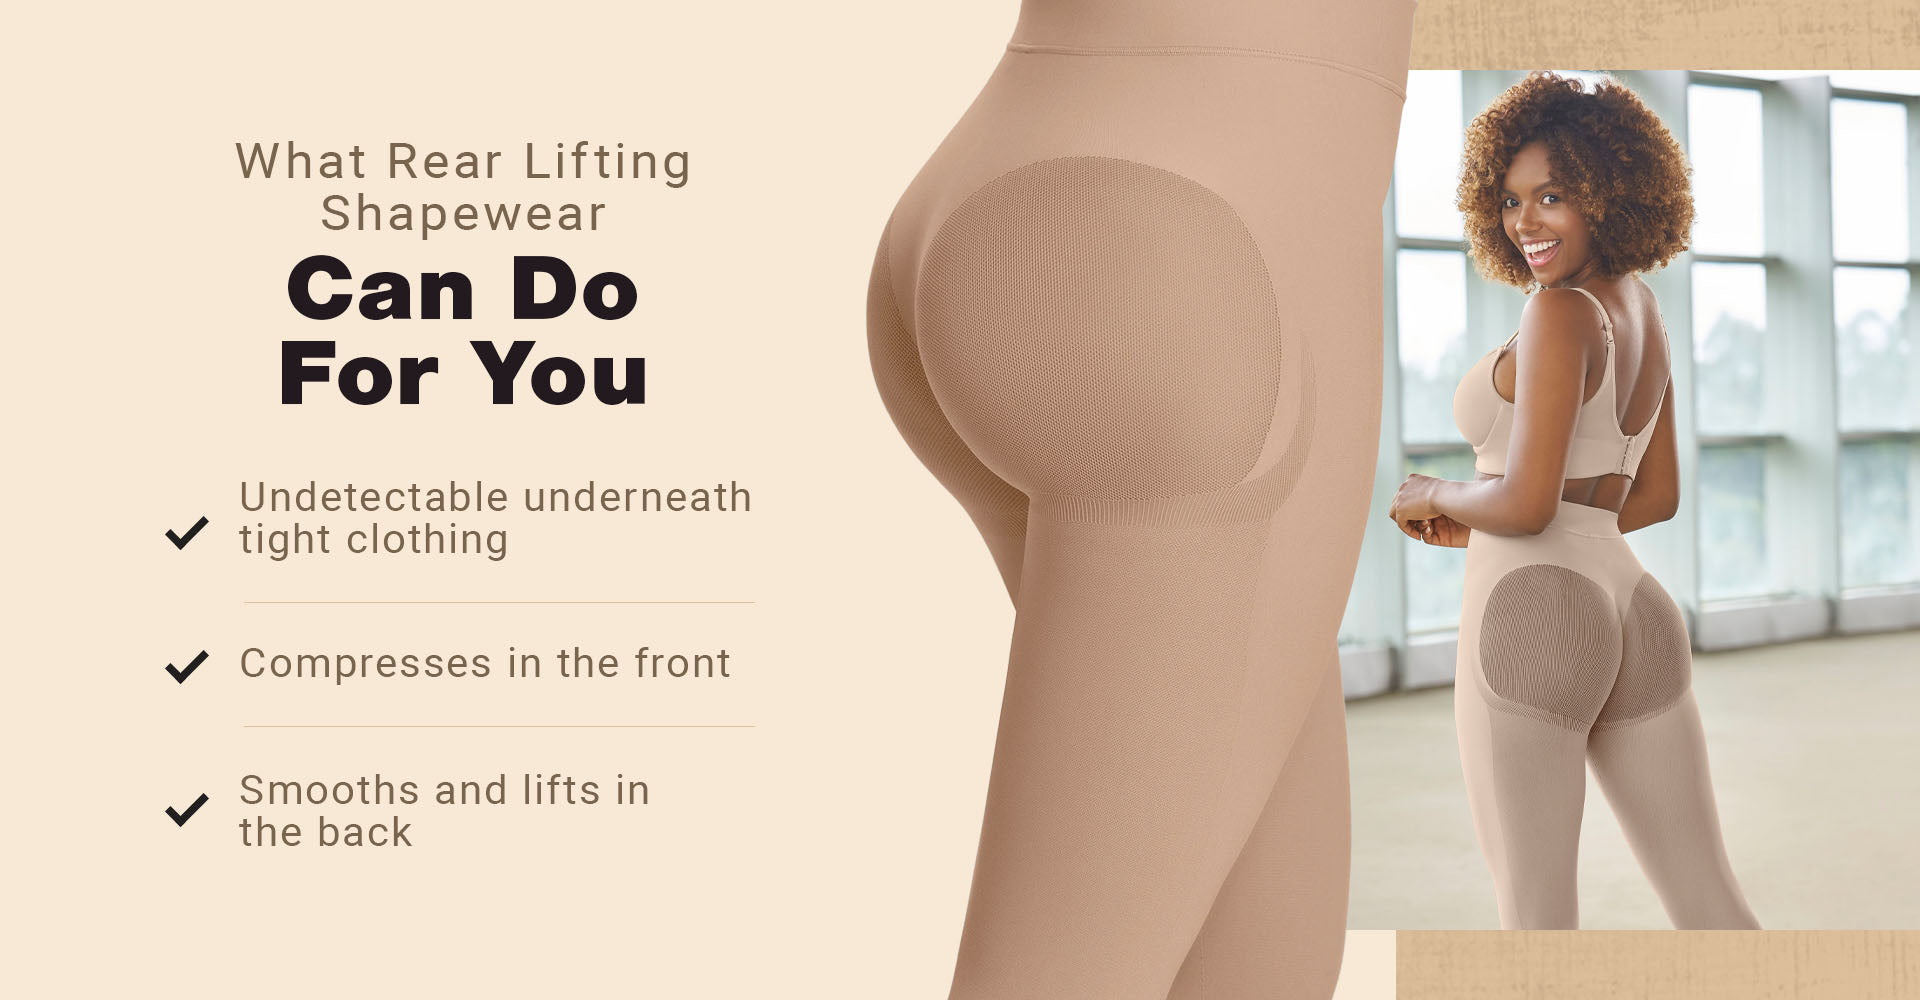 What rear lifting shapewear can do